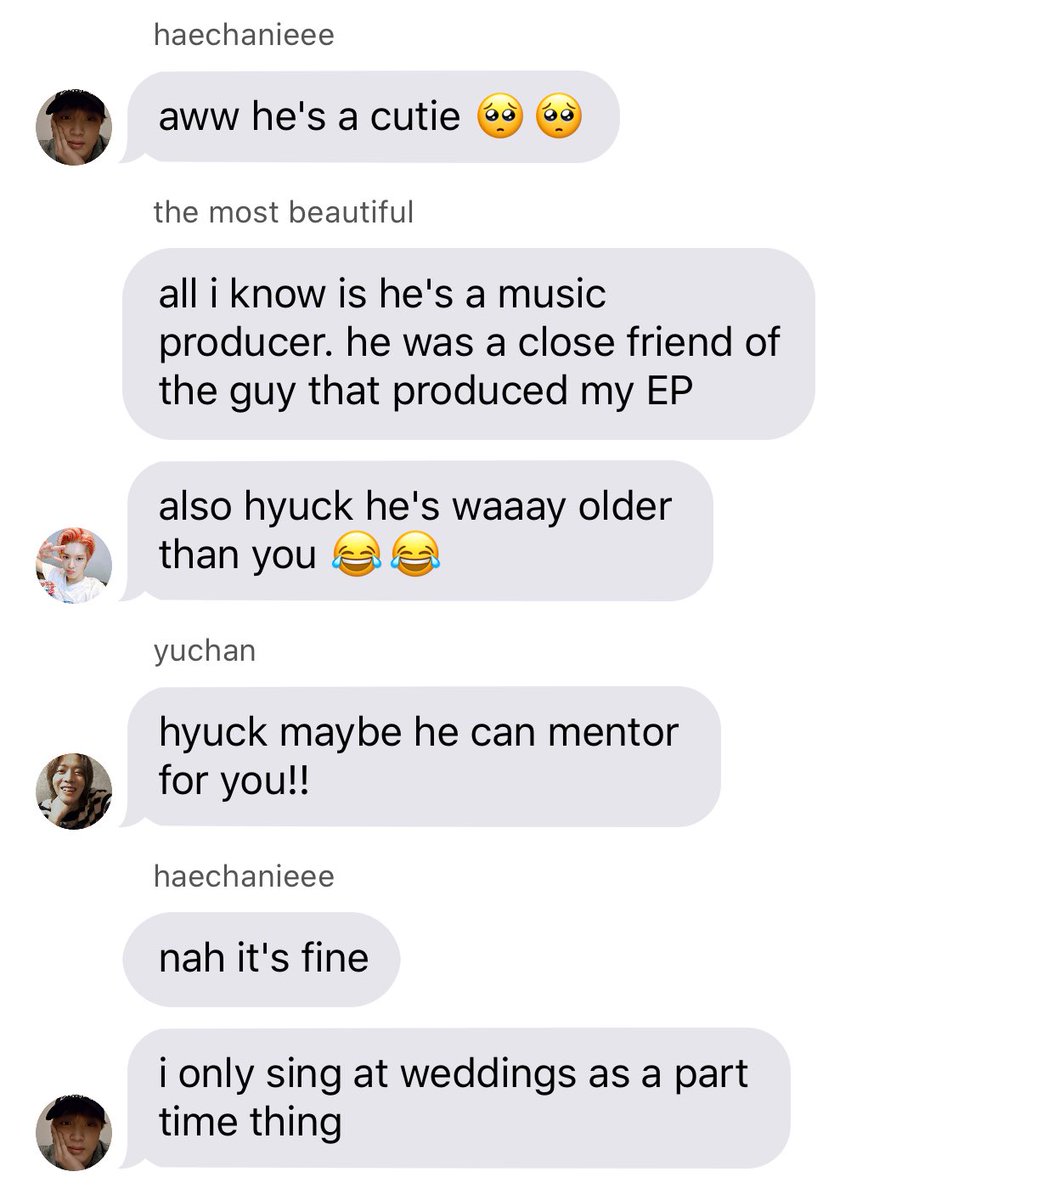 (11) doyoung has left the group chat